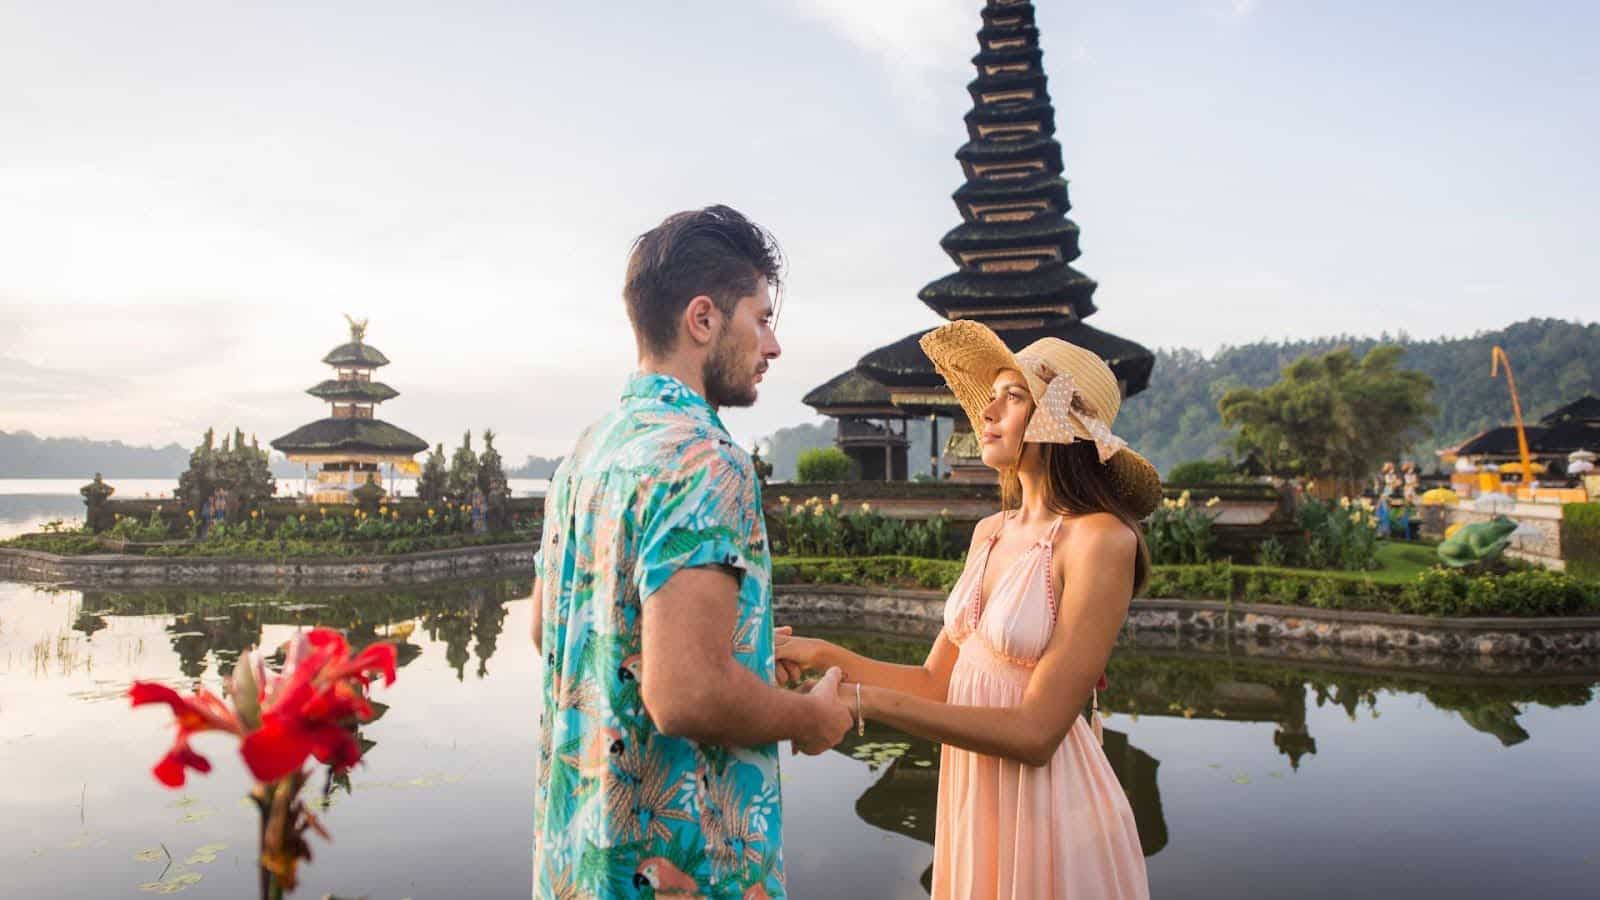 Best Vacation Spots for Couples - Bali